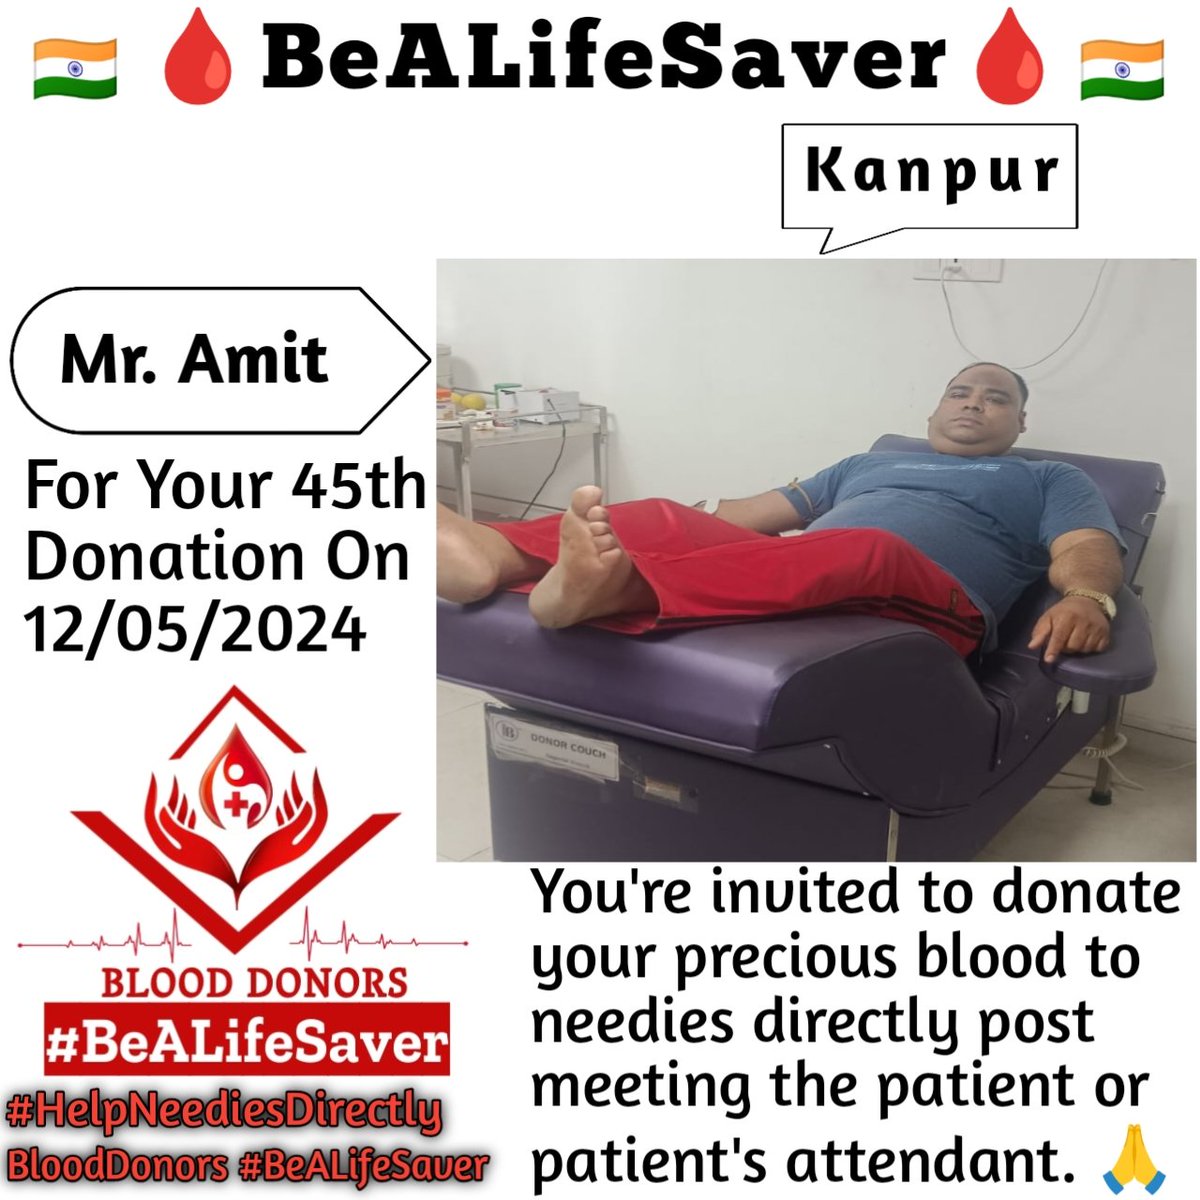 🙏 Congrats For 45th Blood Donation 🙏
Kanpur BeALifeSaver
Kudos_Mr_Amit_Ji

Today's hero
Mr. Amit Ji donated blood in Kanpur for the 45th Time for one of the needies. Heartfelt Gratitude and Respect to Amit Ji for his blood donation for Patient admitted in Kanpur.